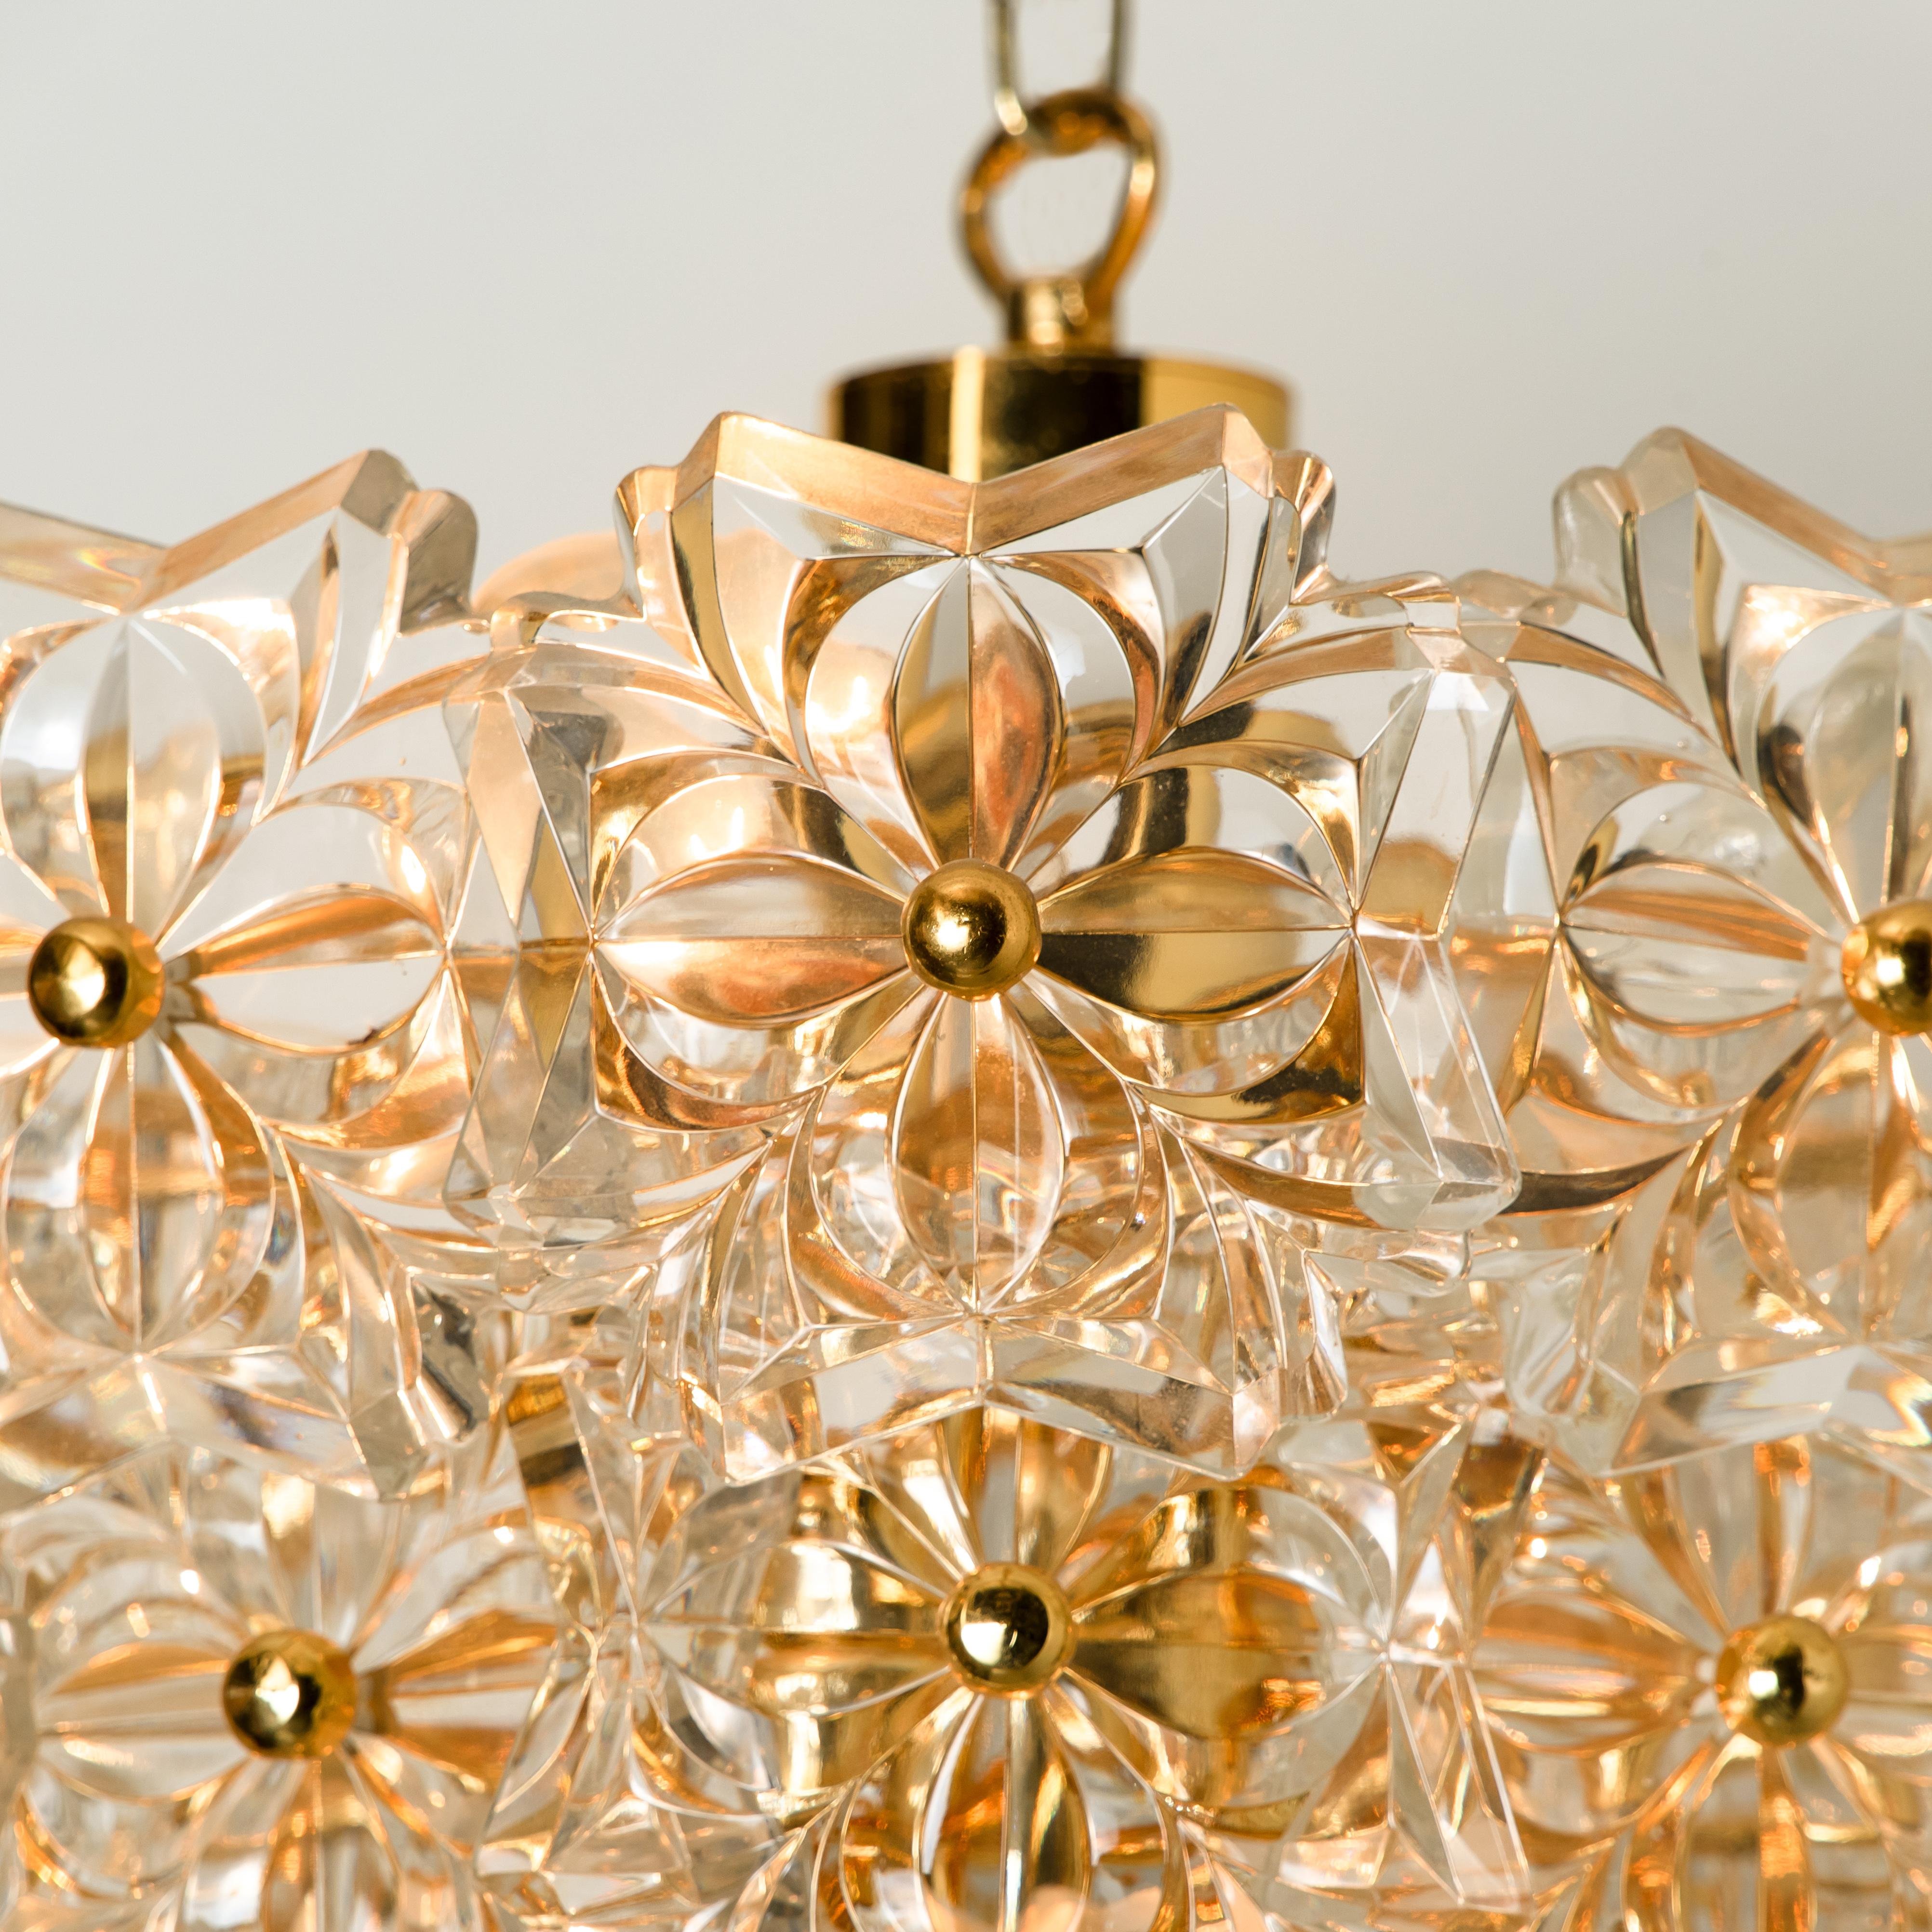 1 of the 2 Glass and Brass Floral Three Tiers Light Fixtures, 1970s For Sale 3